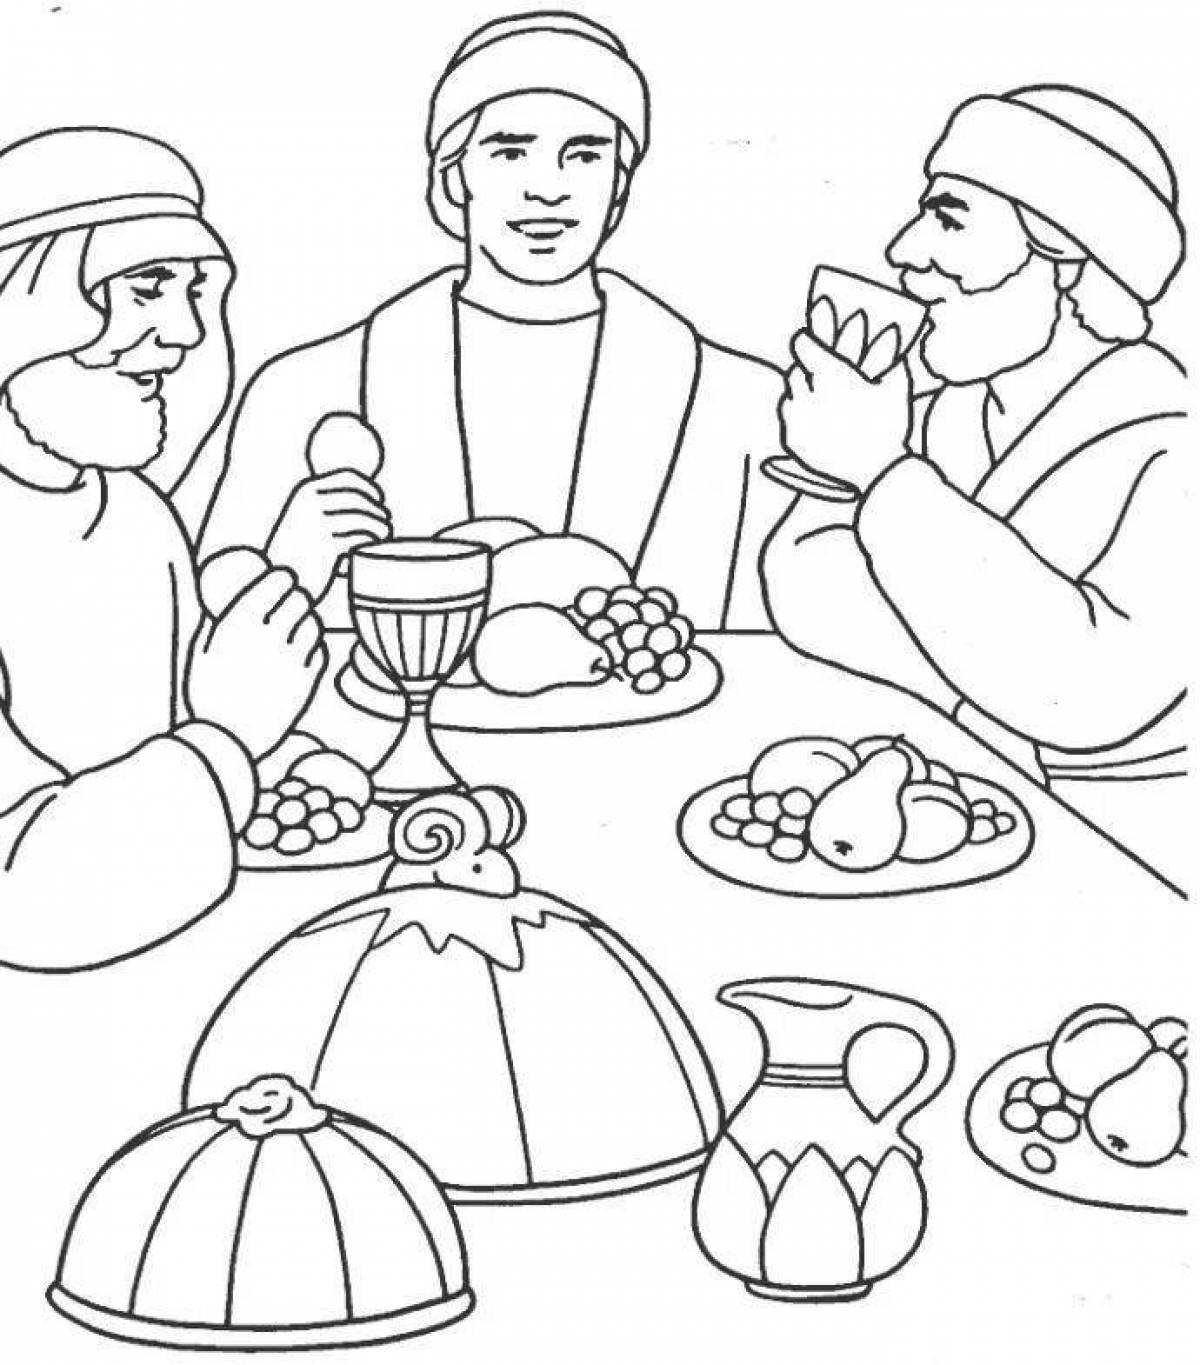 Coloring page delightful holiday